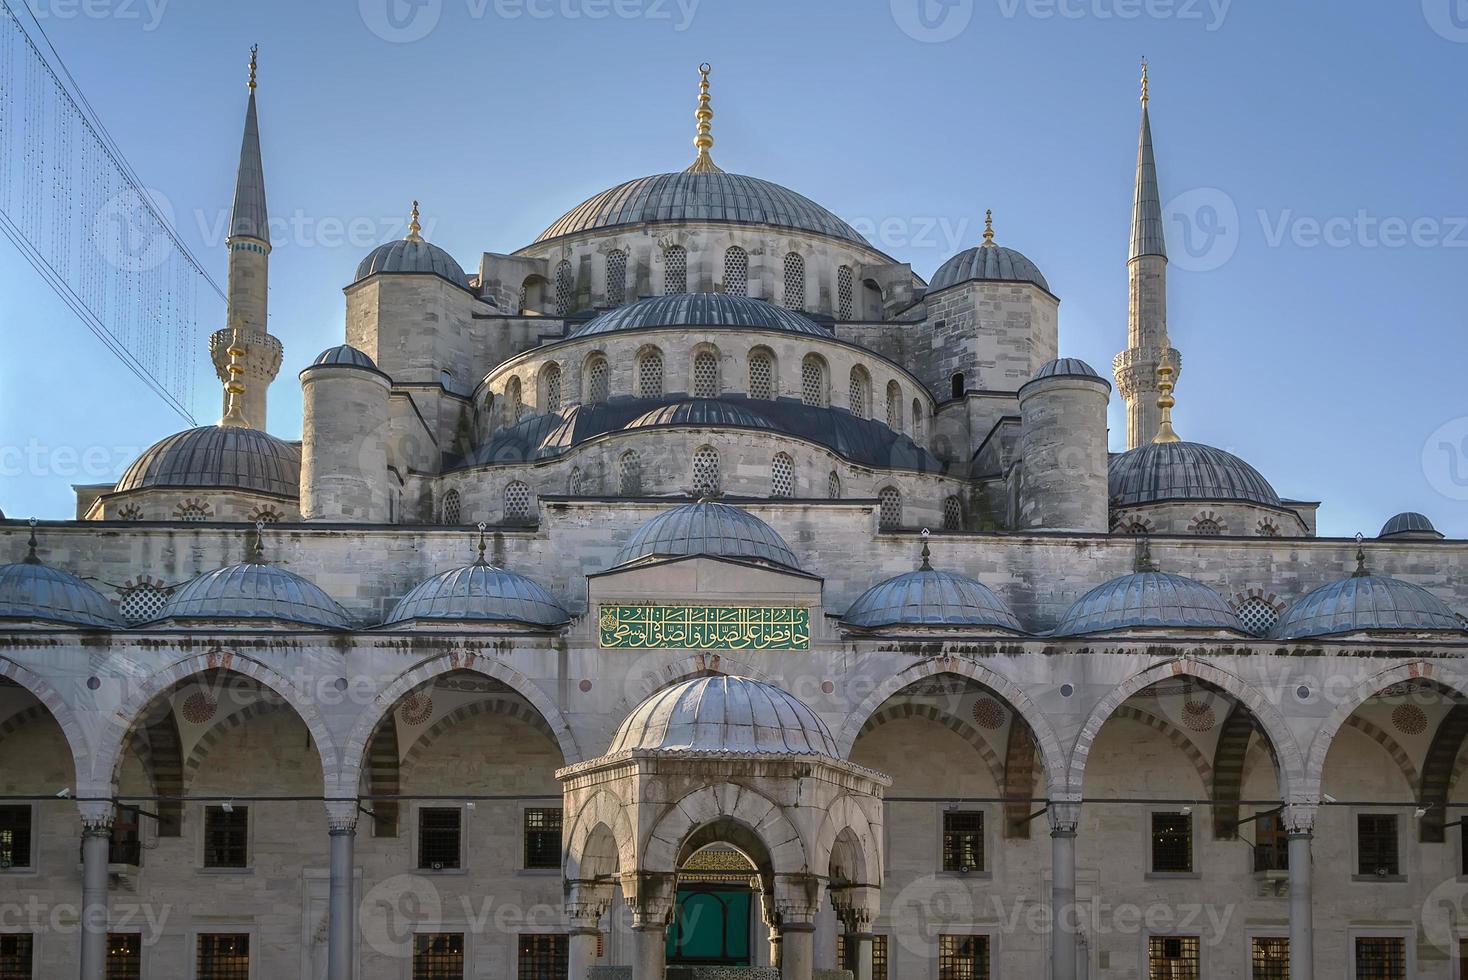 sultan ahmed moskee, istanbul foto